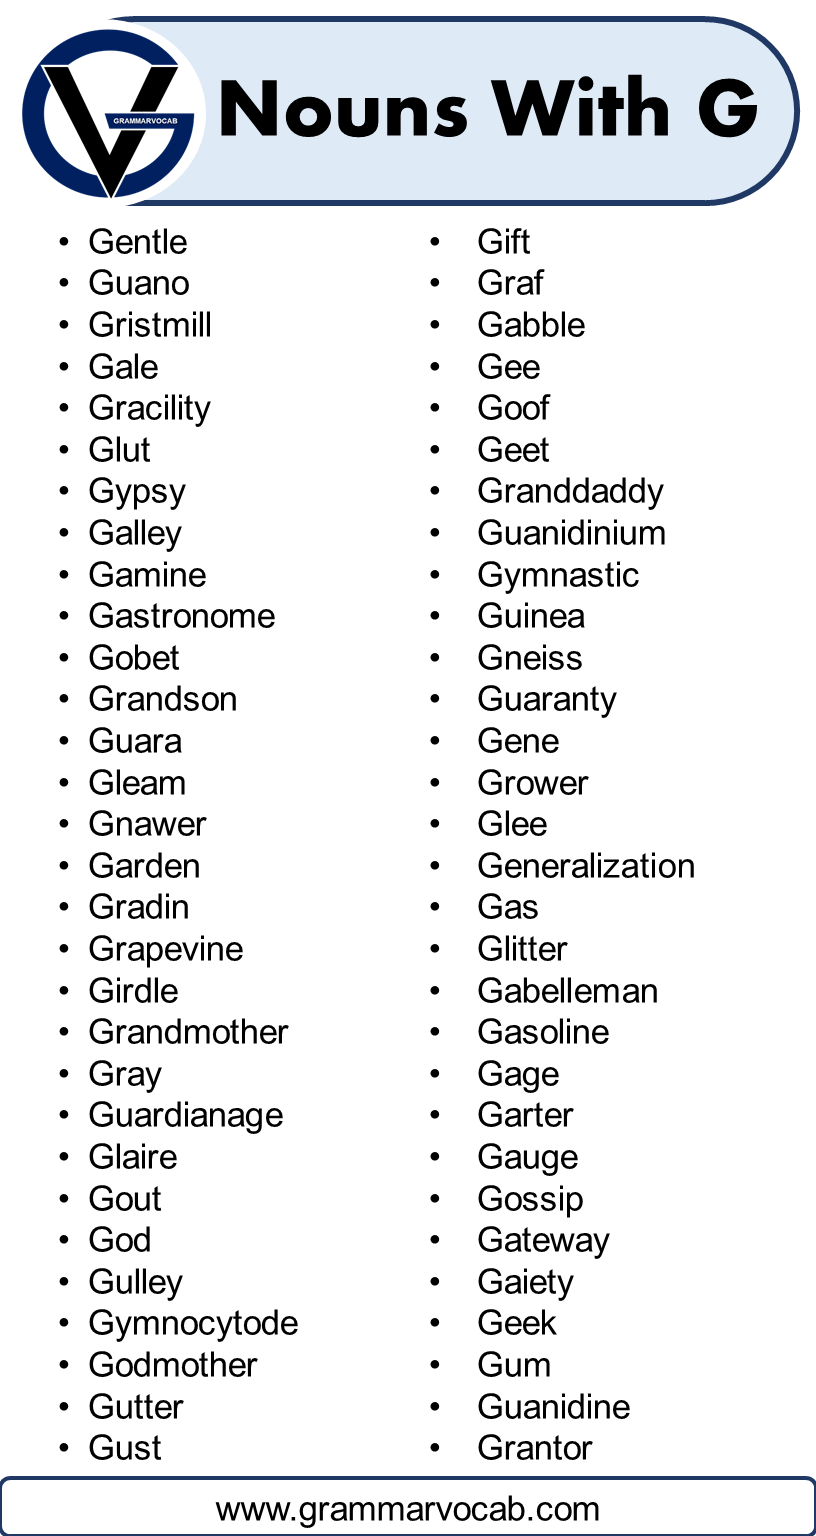 Nouns That Start With G